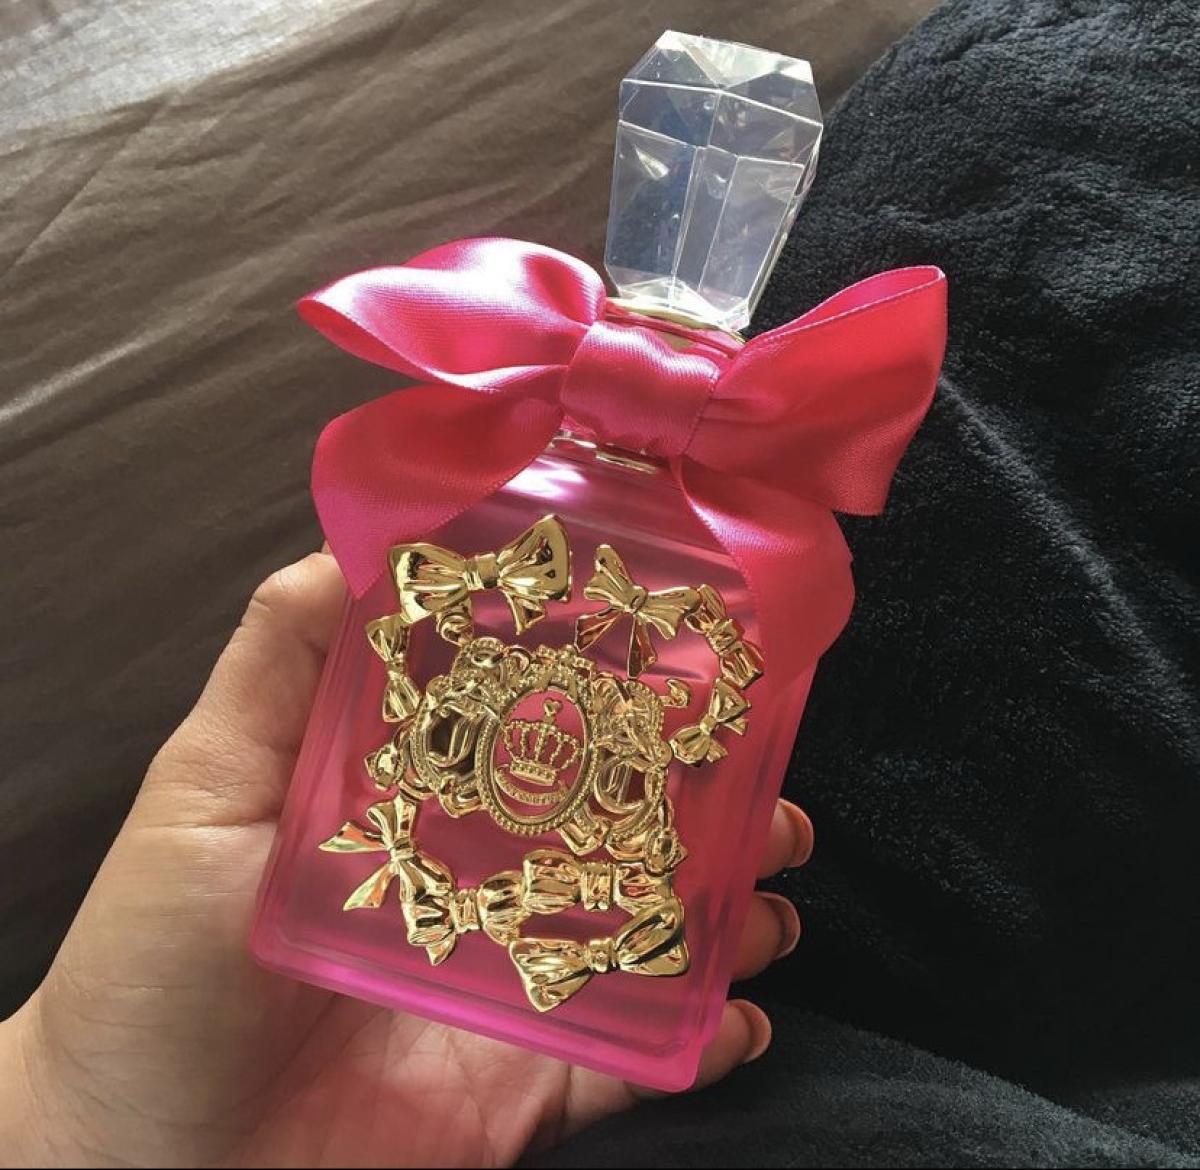 Viva La Juicy Pink Couture Juicy Couture perfume - a fragrance for ...